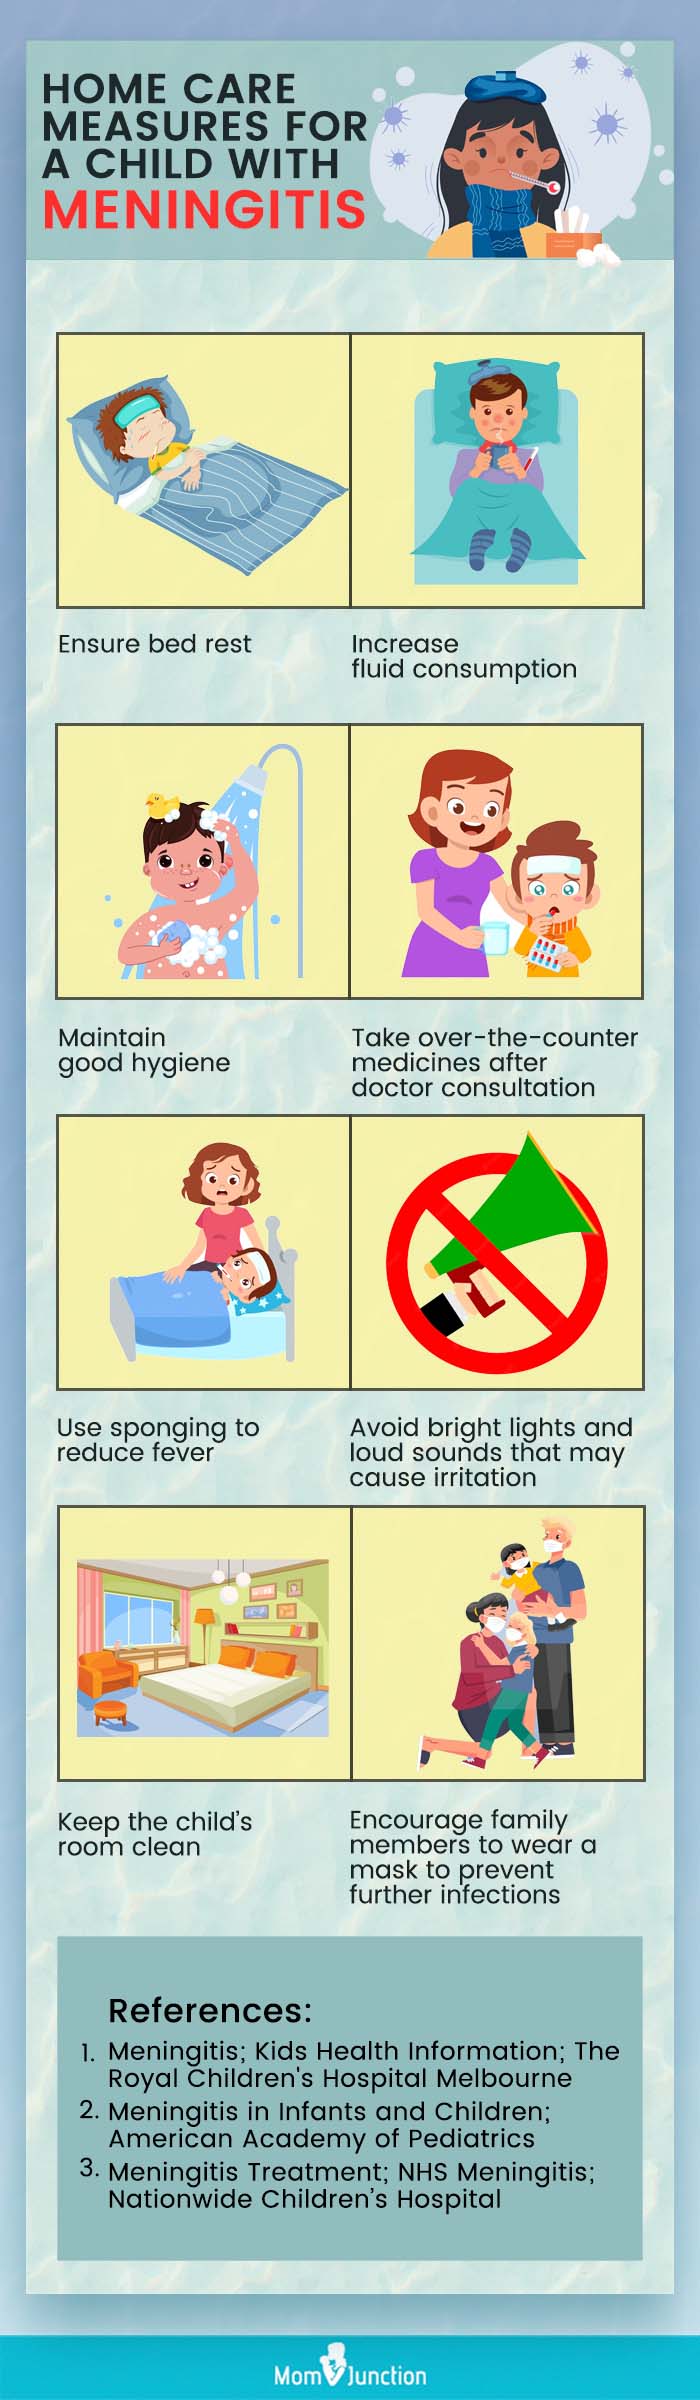 home care measures for a child with meningitis (infographic)